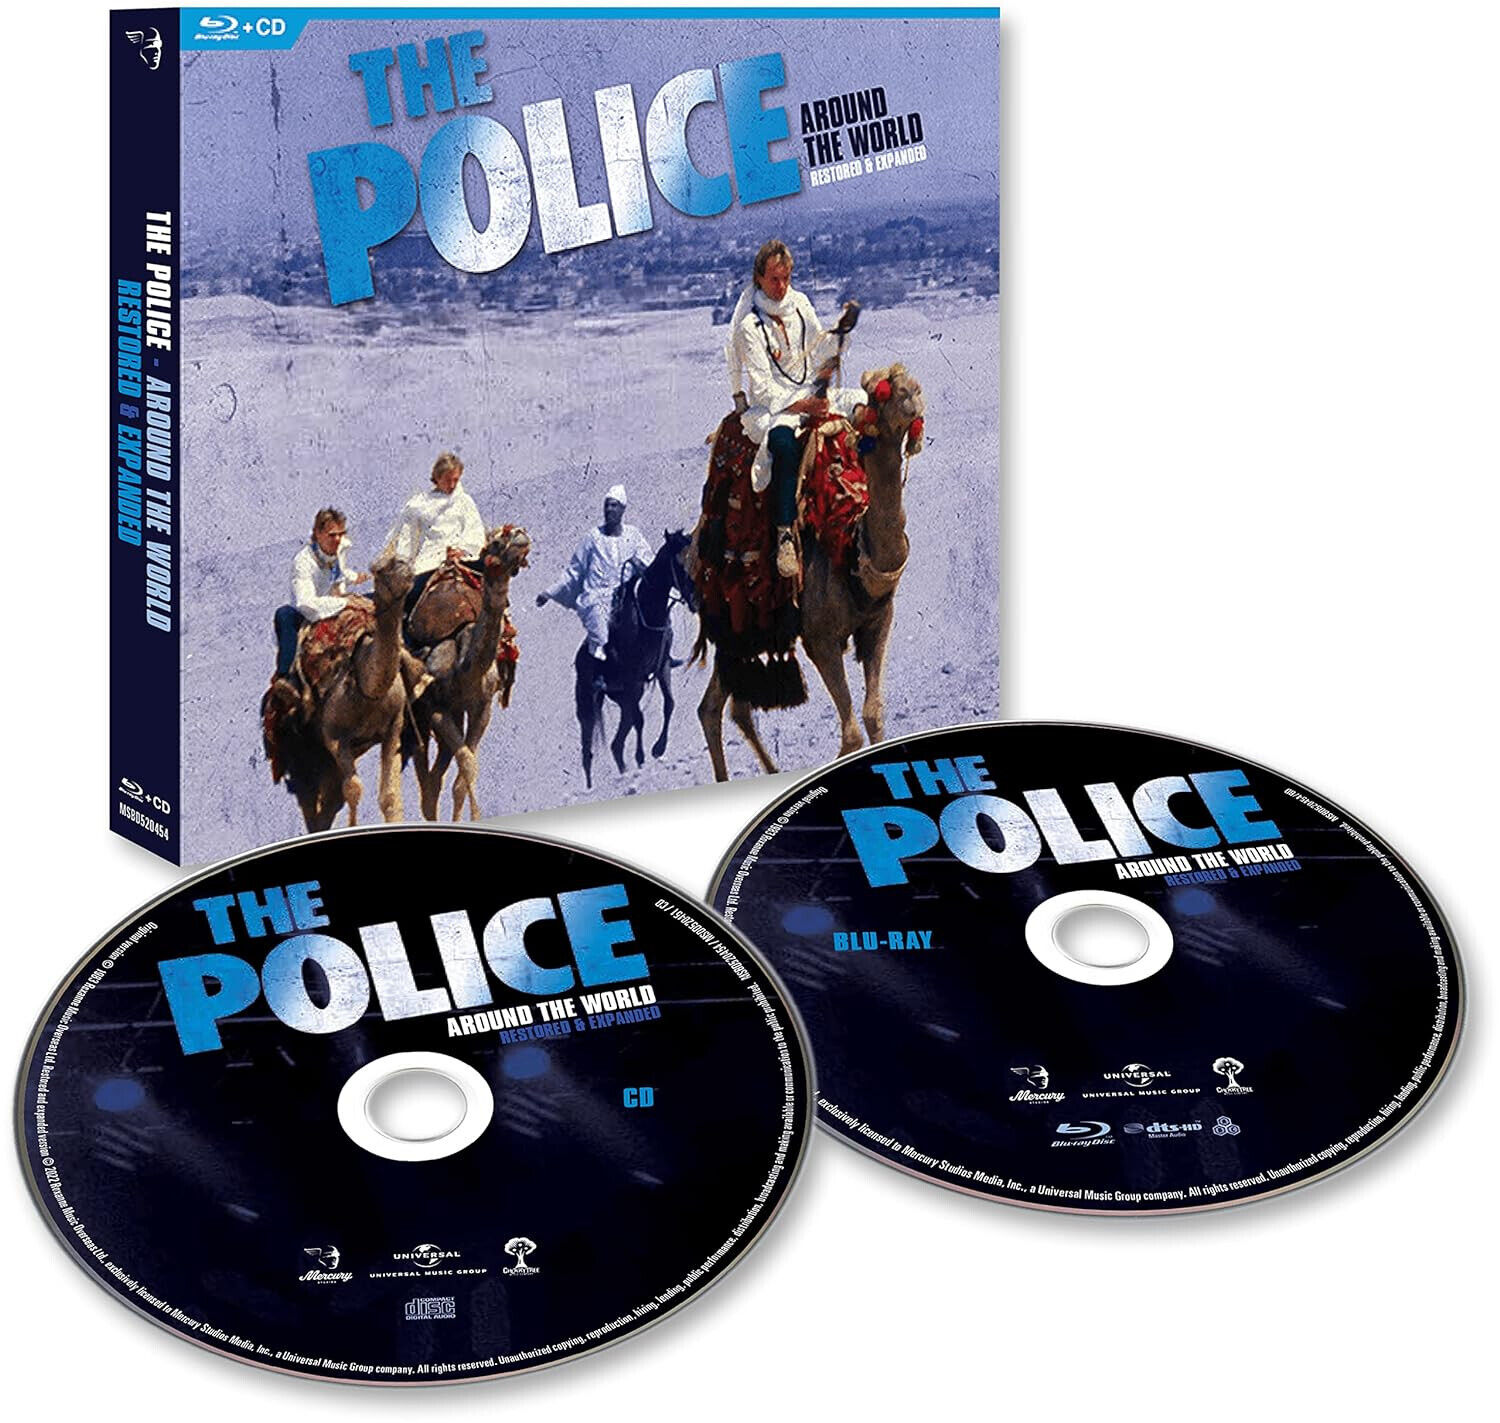 Around The World Restored & Expanded Blu-ray/CD by The Police (CD, 2022)